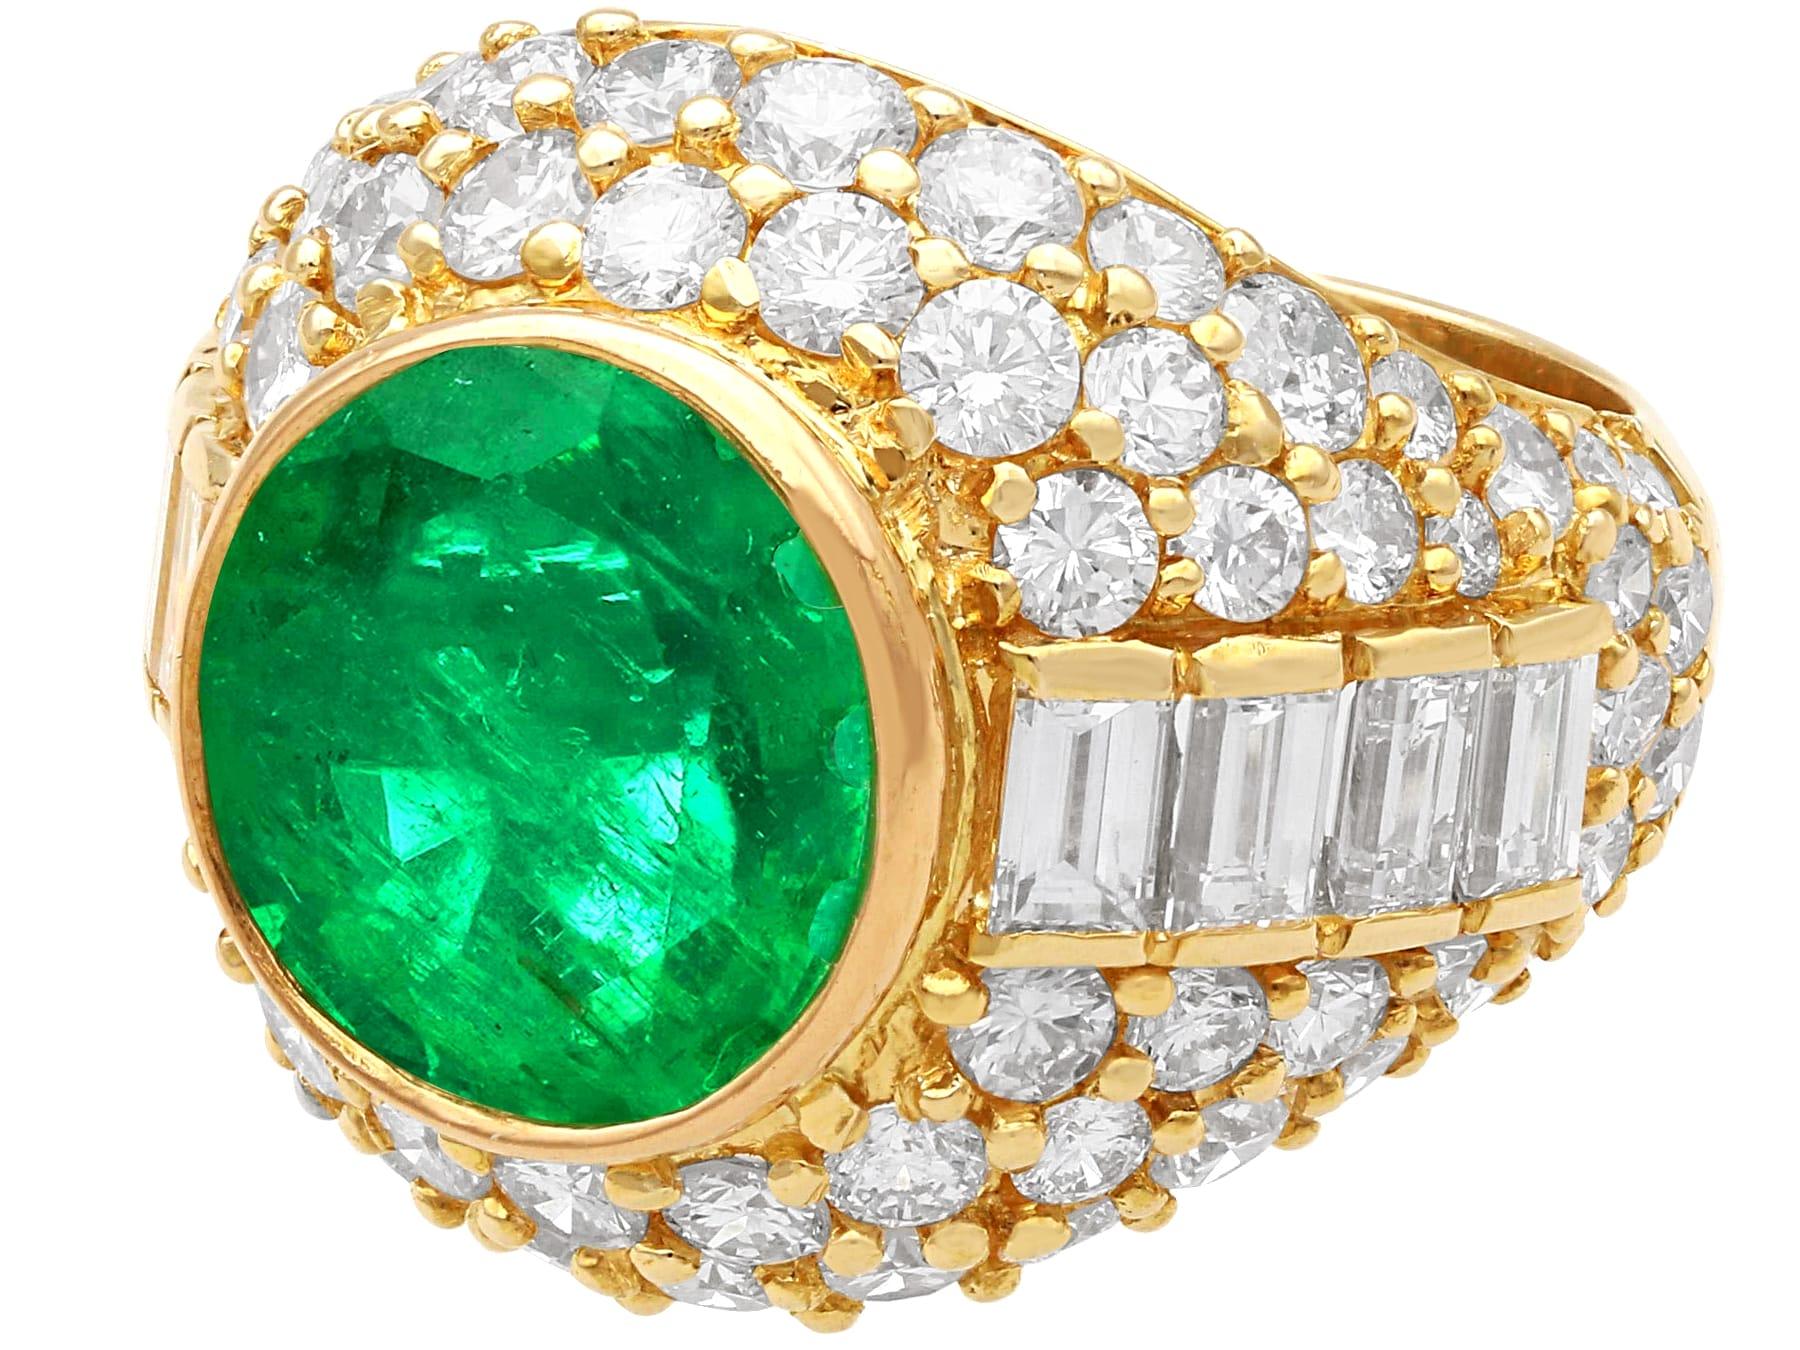 Vintage 5.12ct Colombian Emerald and 3.45ct Diamond, 18ct Yellow Gold Dress Ring In Excellent Condition For Sale In Jesmond, Newcastle Upon Tyne